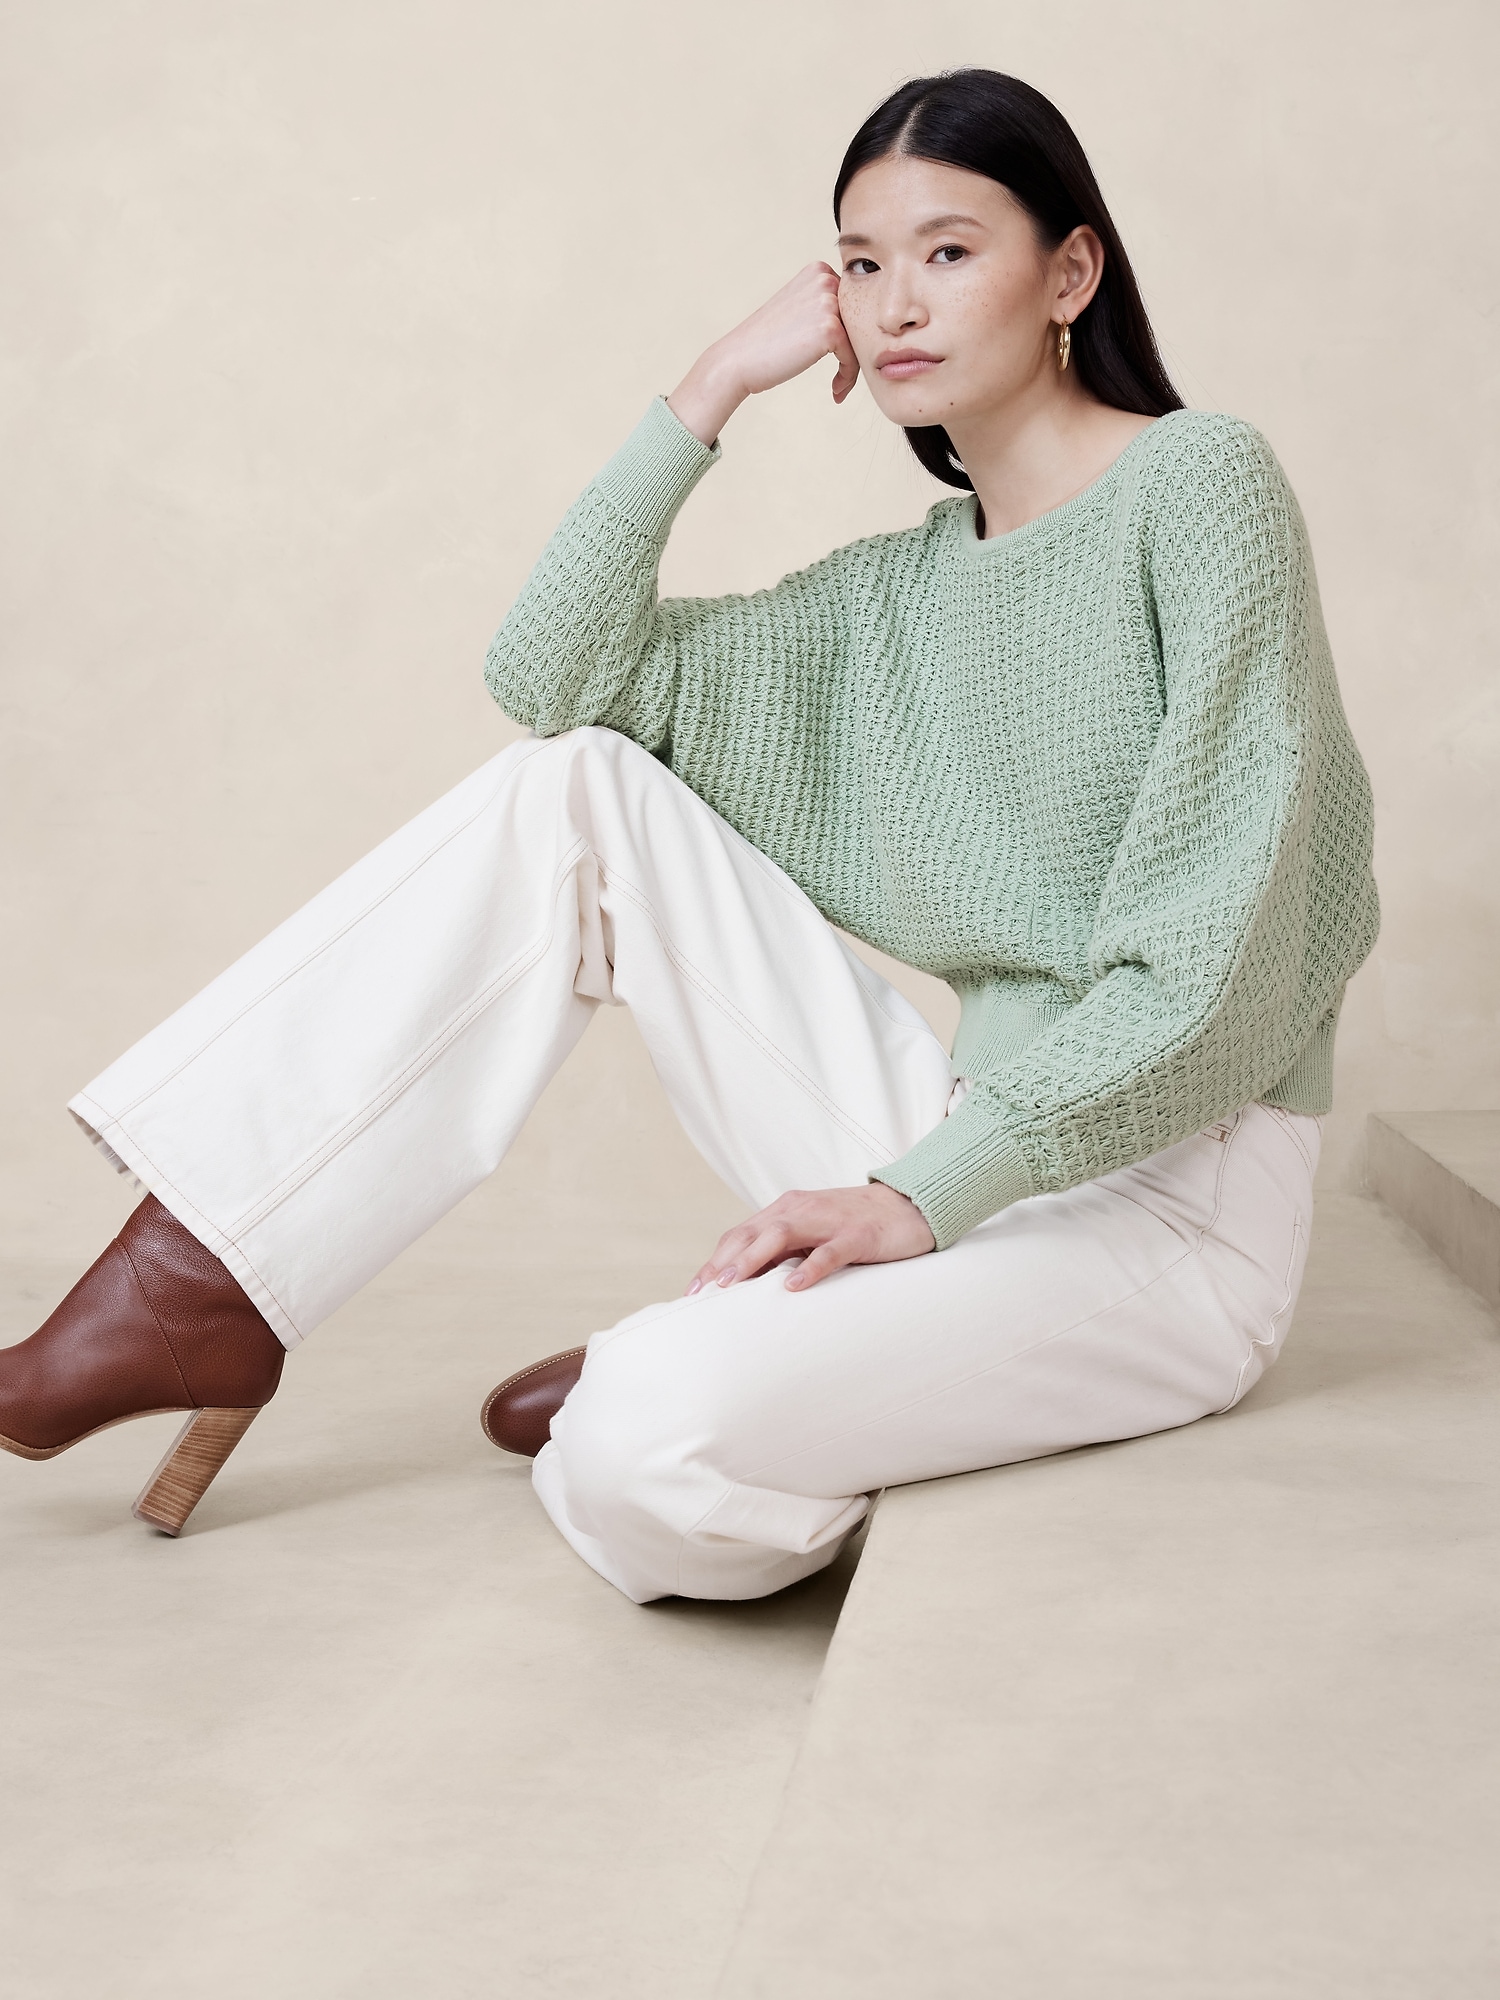 Meredith Cotton Boat-Neck Sweater